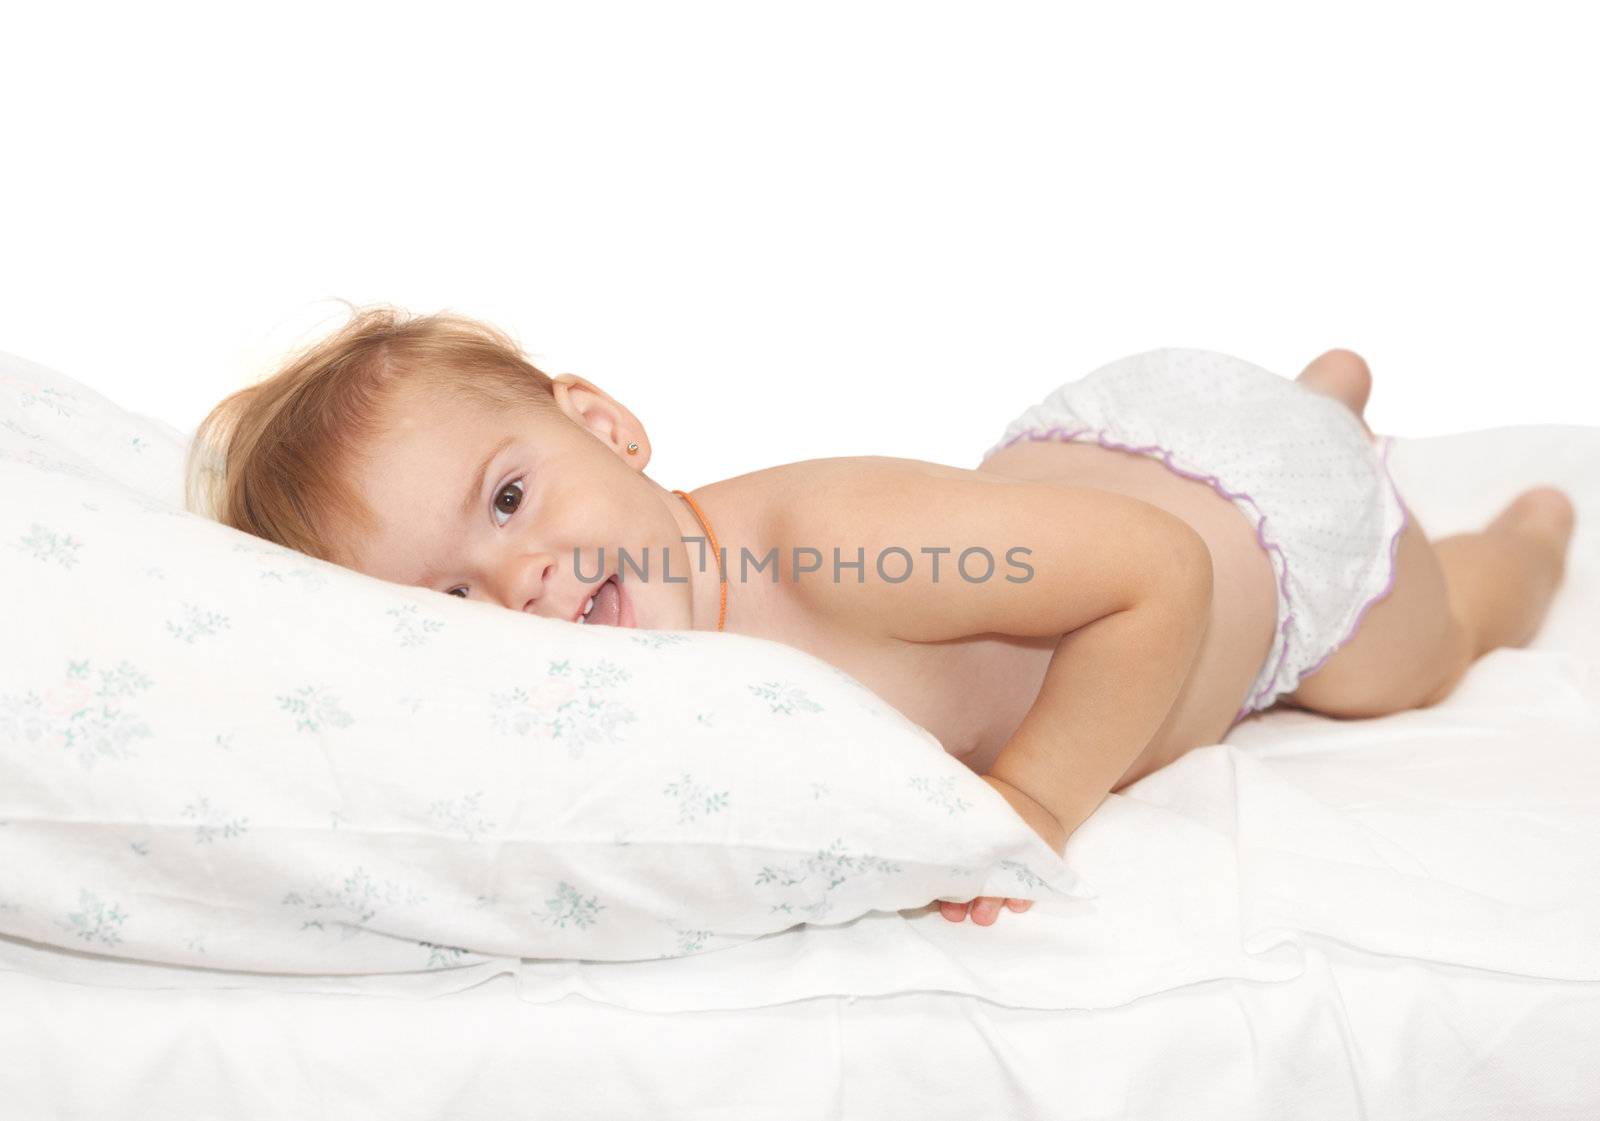 The baby on a bed by petrkurgan